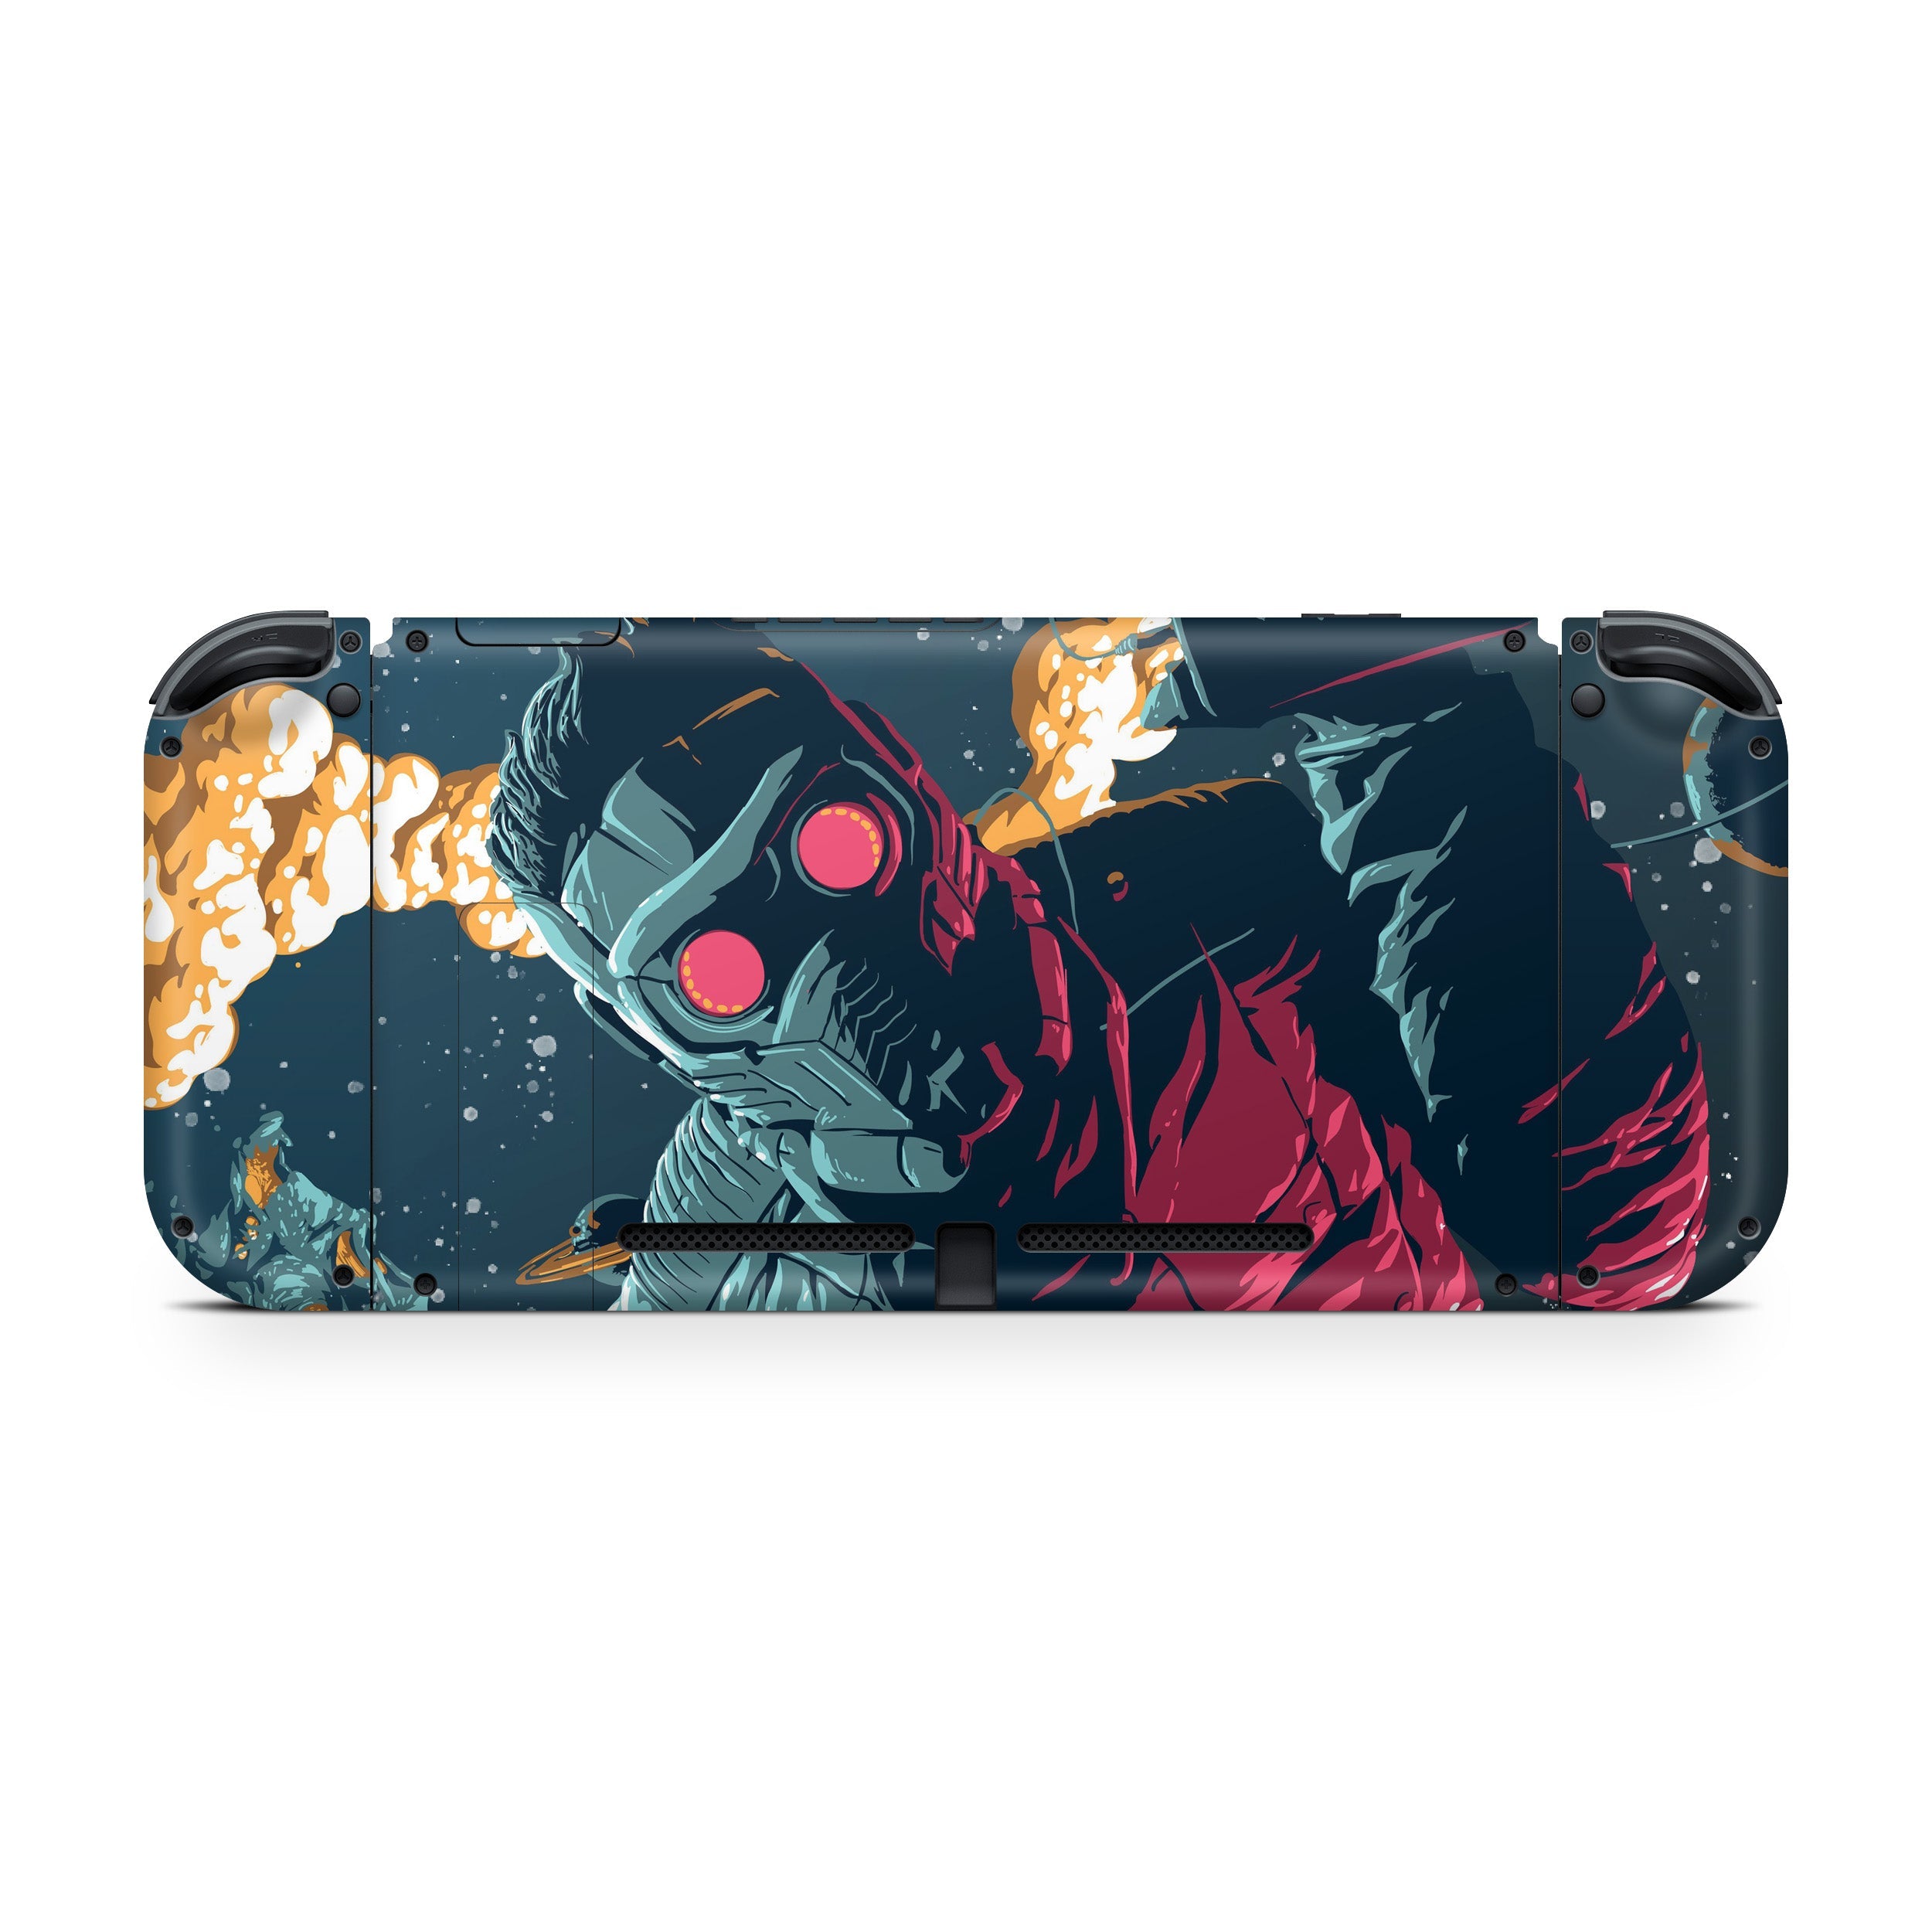 A video game skin featuring a Marvel Guardians of the Galaxy Star Lord design for the Nintendo Switch.